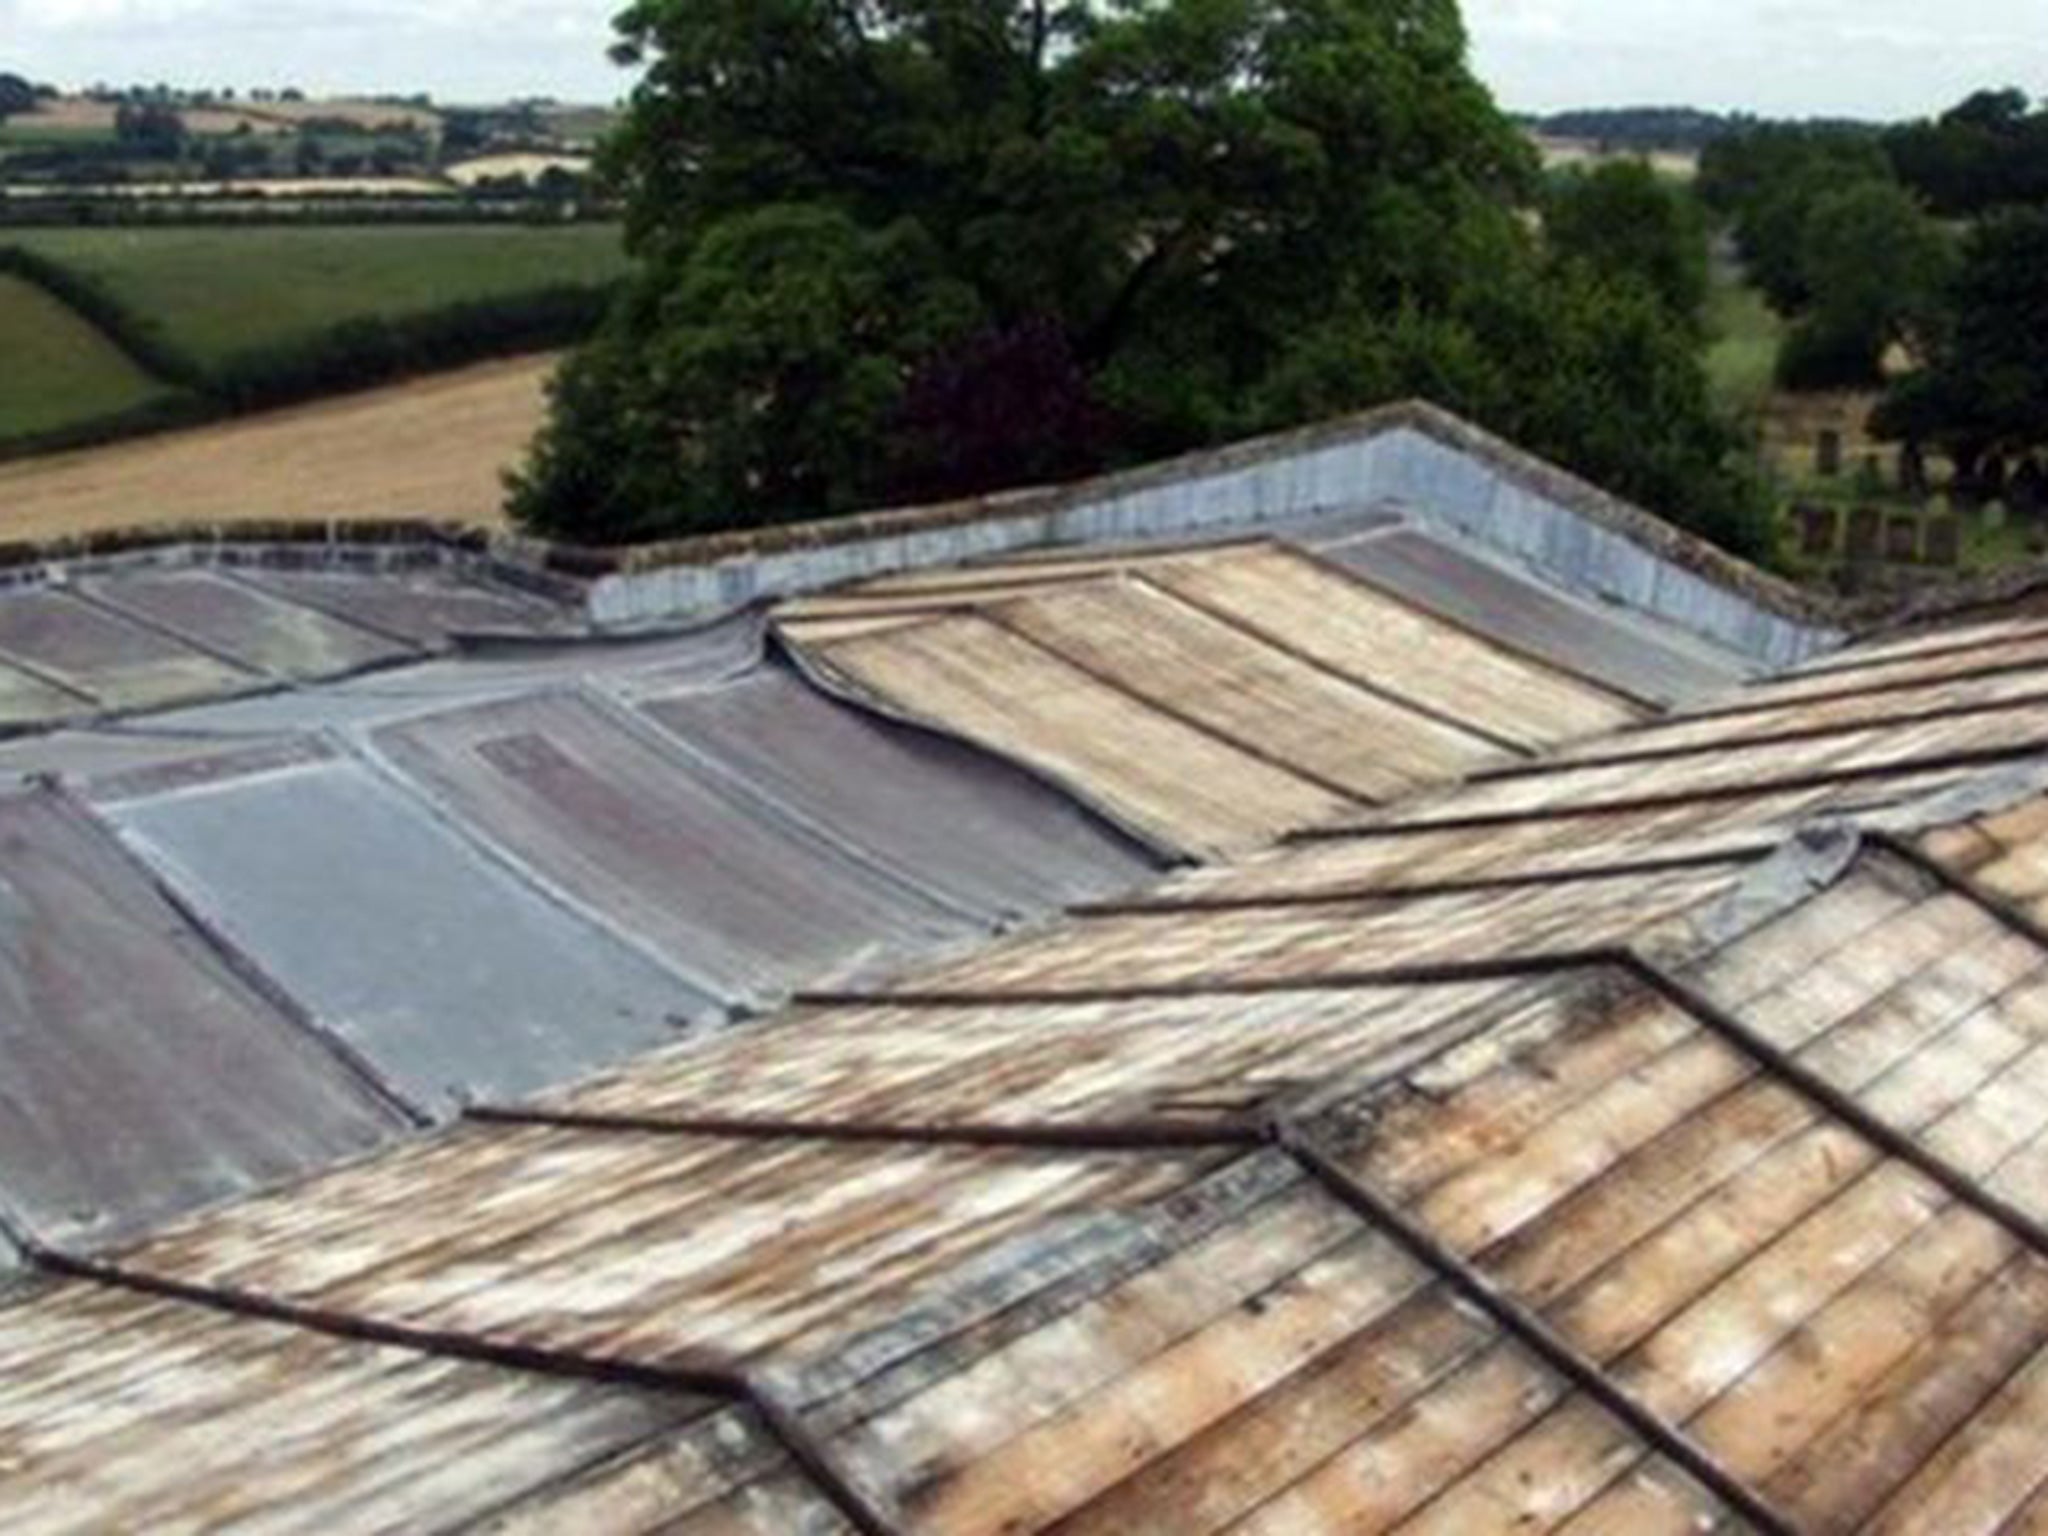 Thieves stole 12 tonnes of lead from the roof of St Mary's in Brington